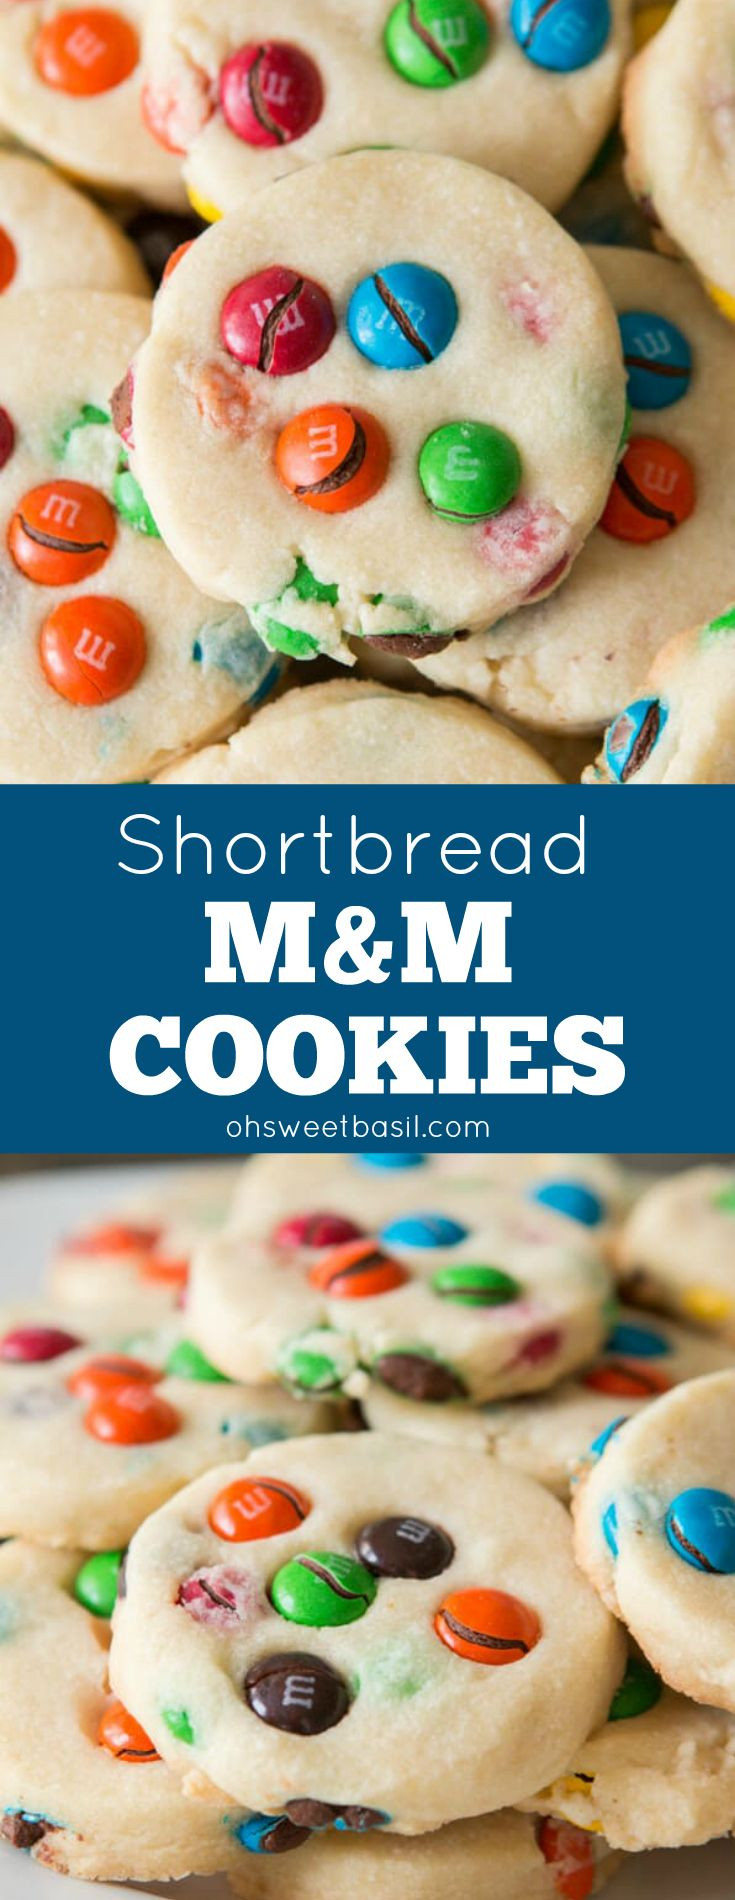 M&amp;M Christmas Cookies
 Buttery shortbread m&m cookies We love making these